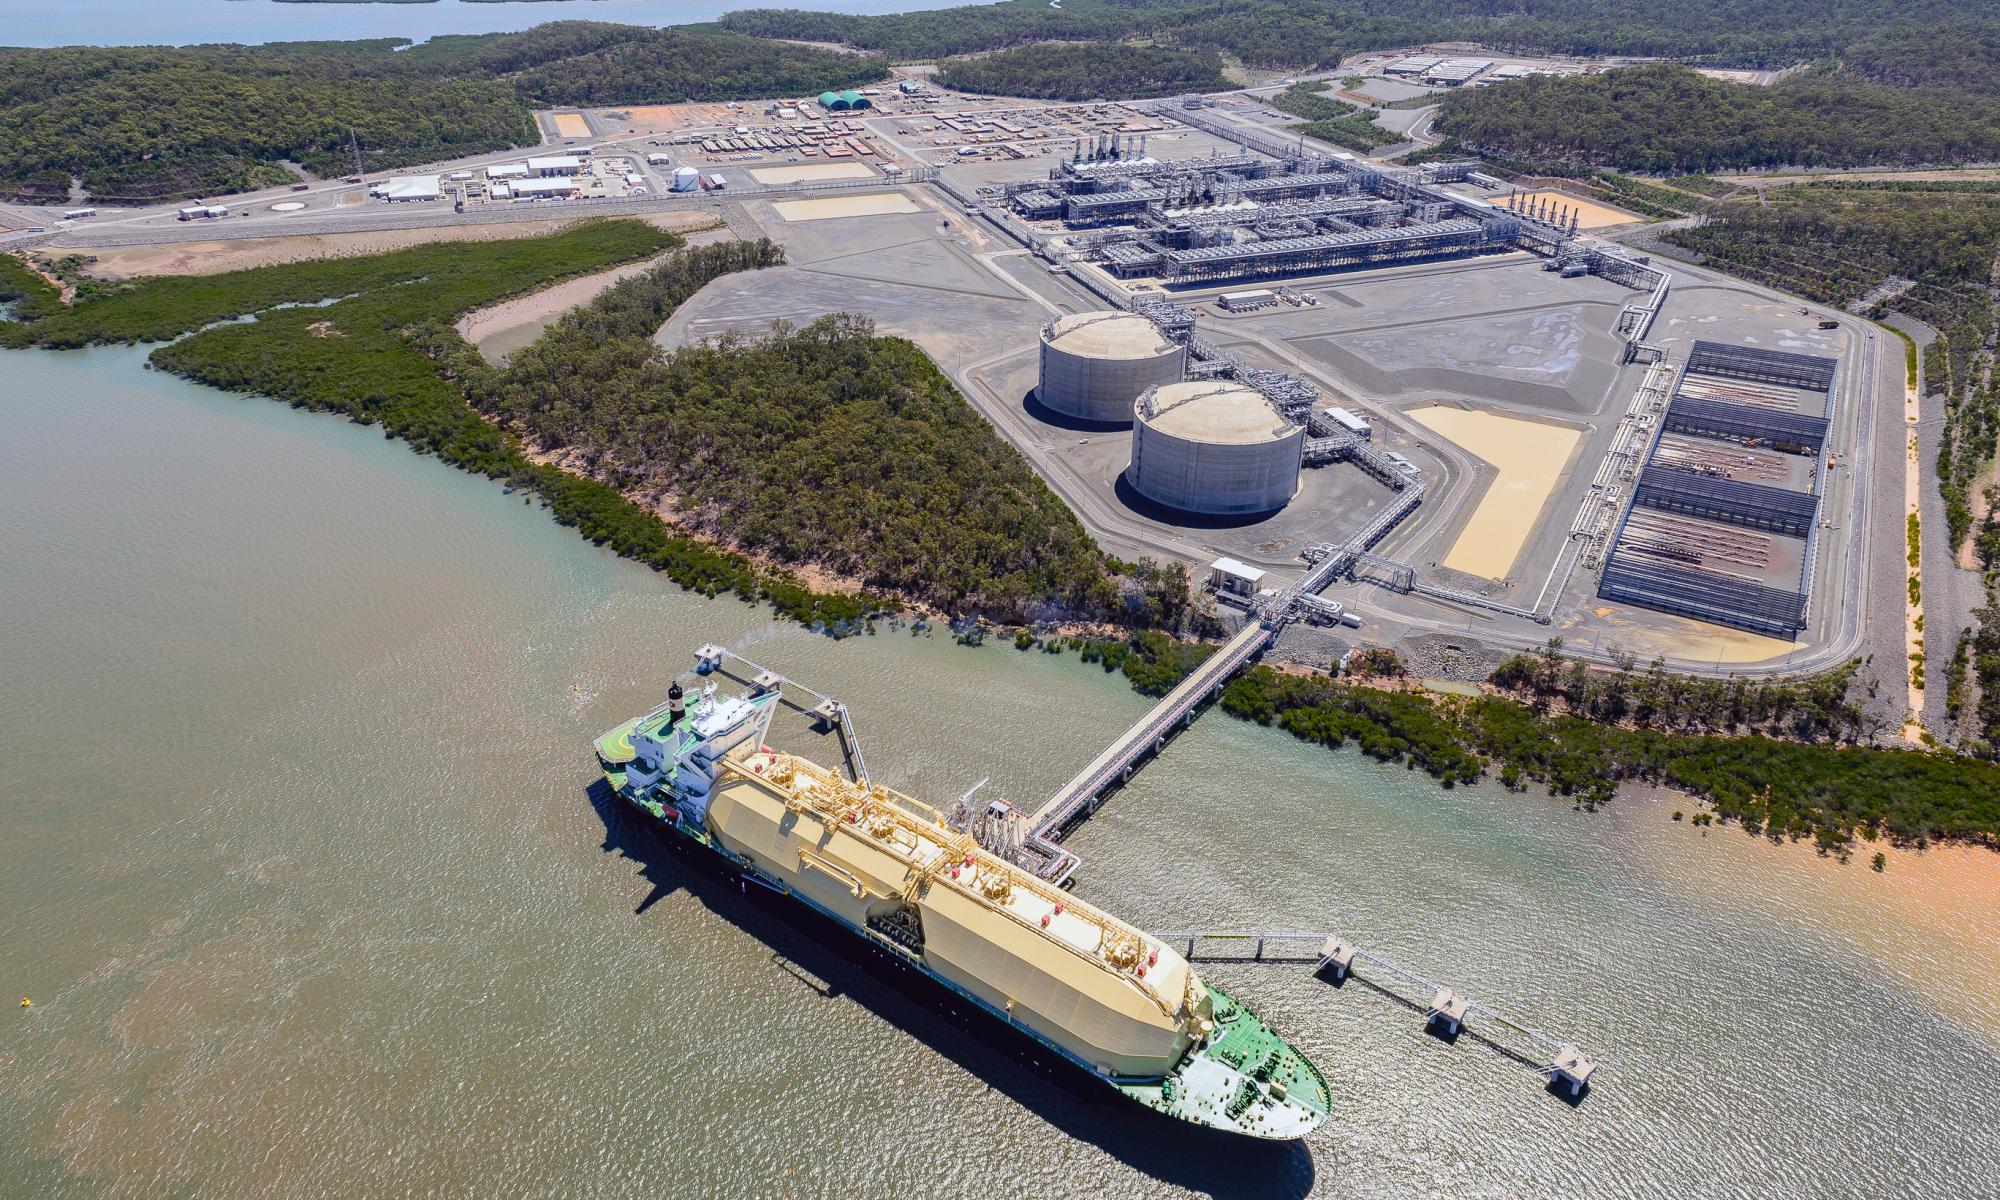 Australia's booming LNG industry stalls after fall in oil prices amid coronavirus